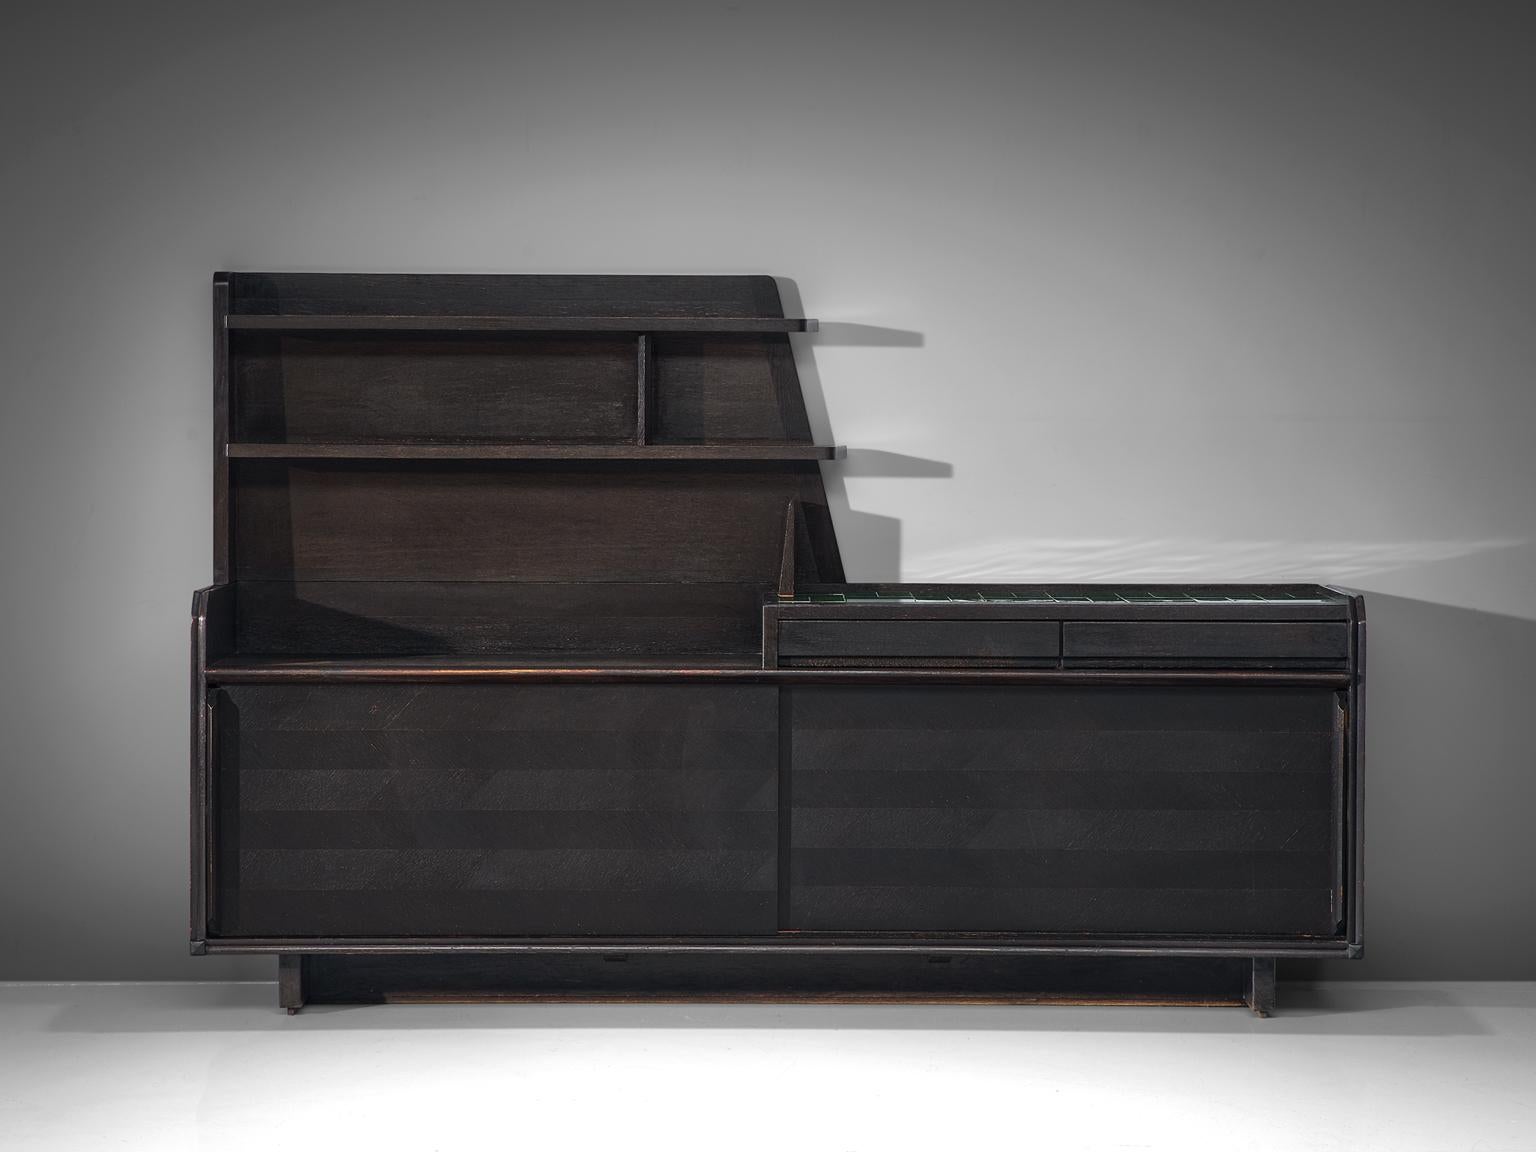 Sideboard, in oak and ceramic by Guillerme et Chambron, France, 1960s.

Large sideboards in dark stained oak. The top shows some nice green glazed tiles. Two sliding doors on the front with beautiful graphical patterns of woodcarving. The shelves